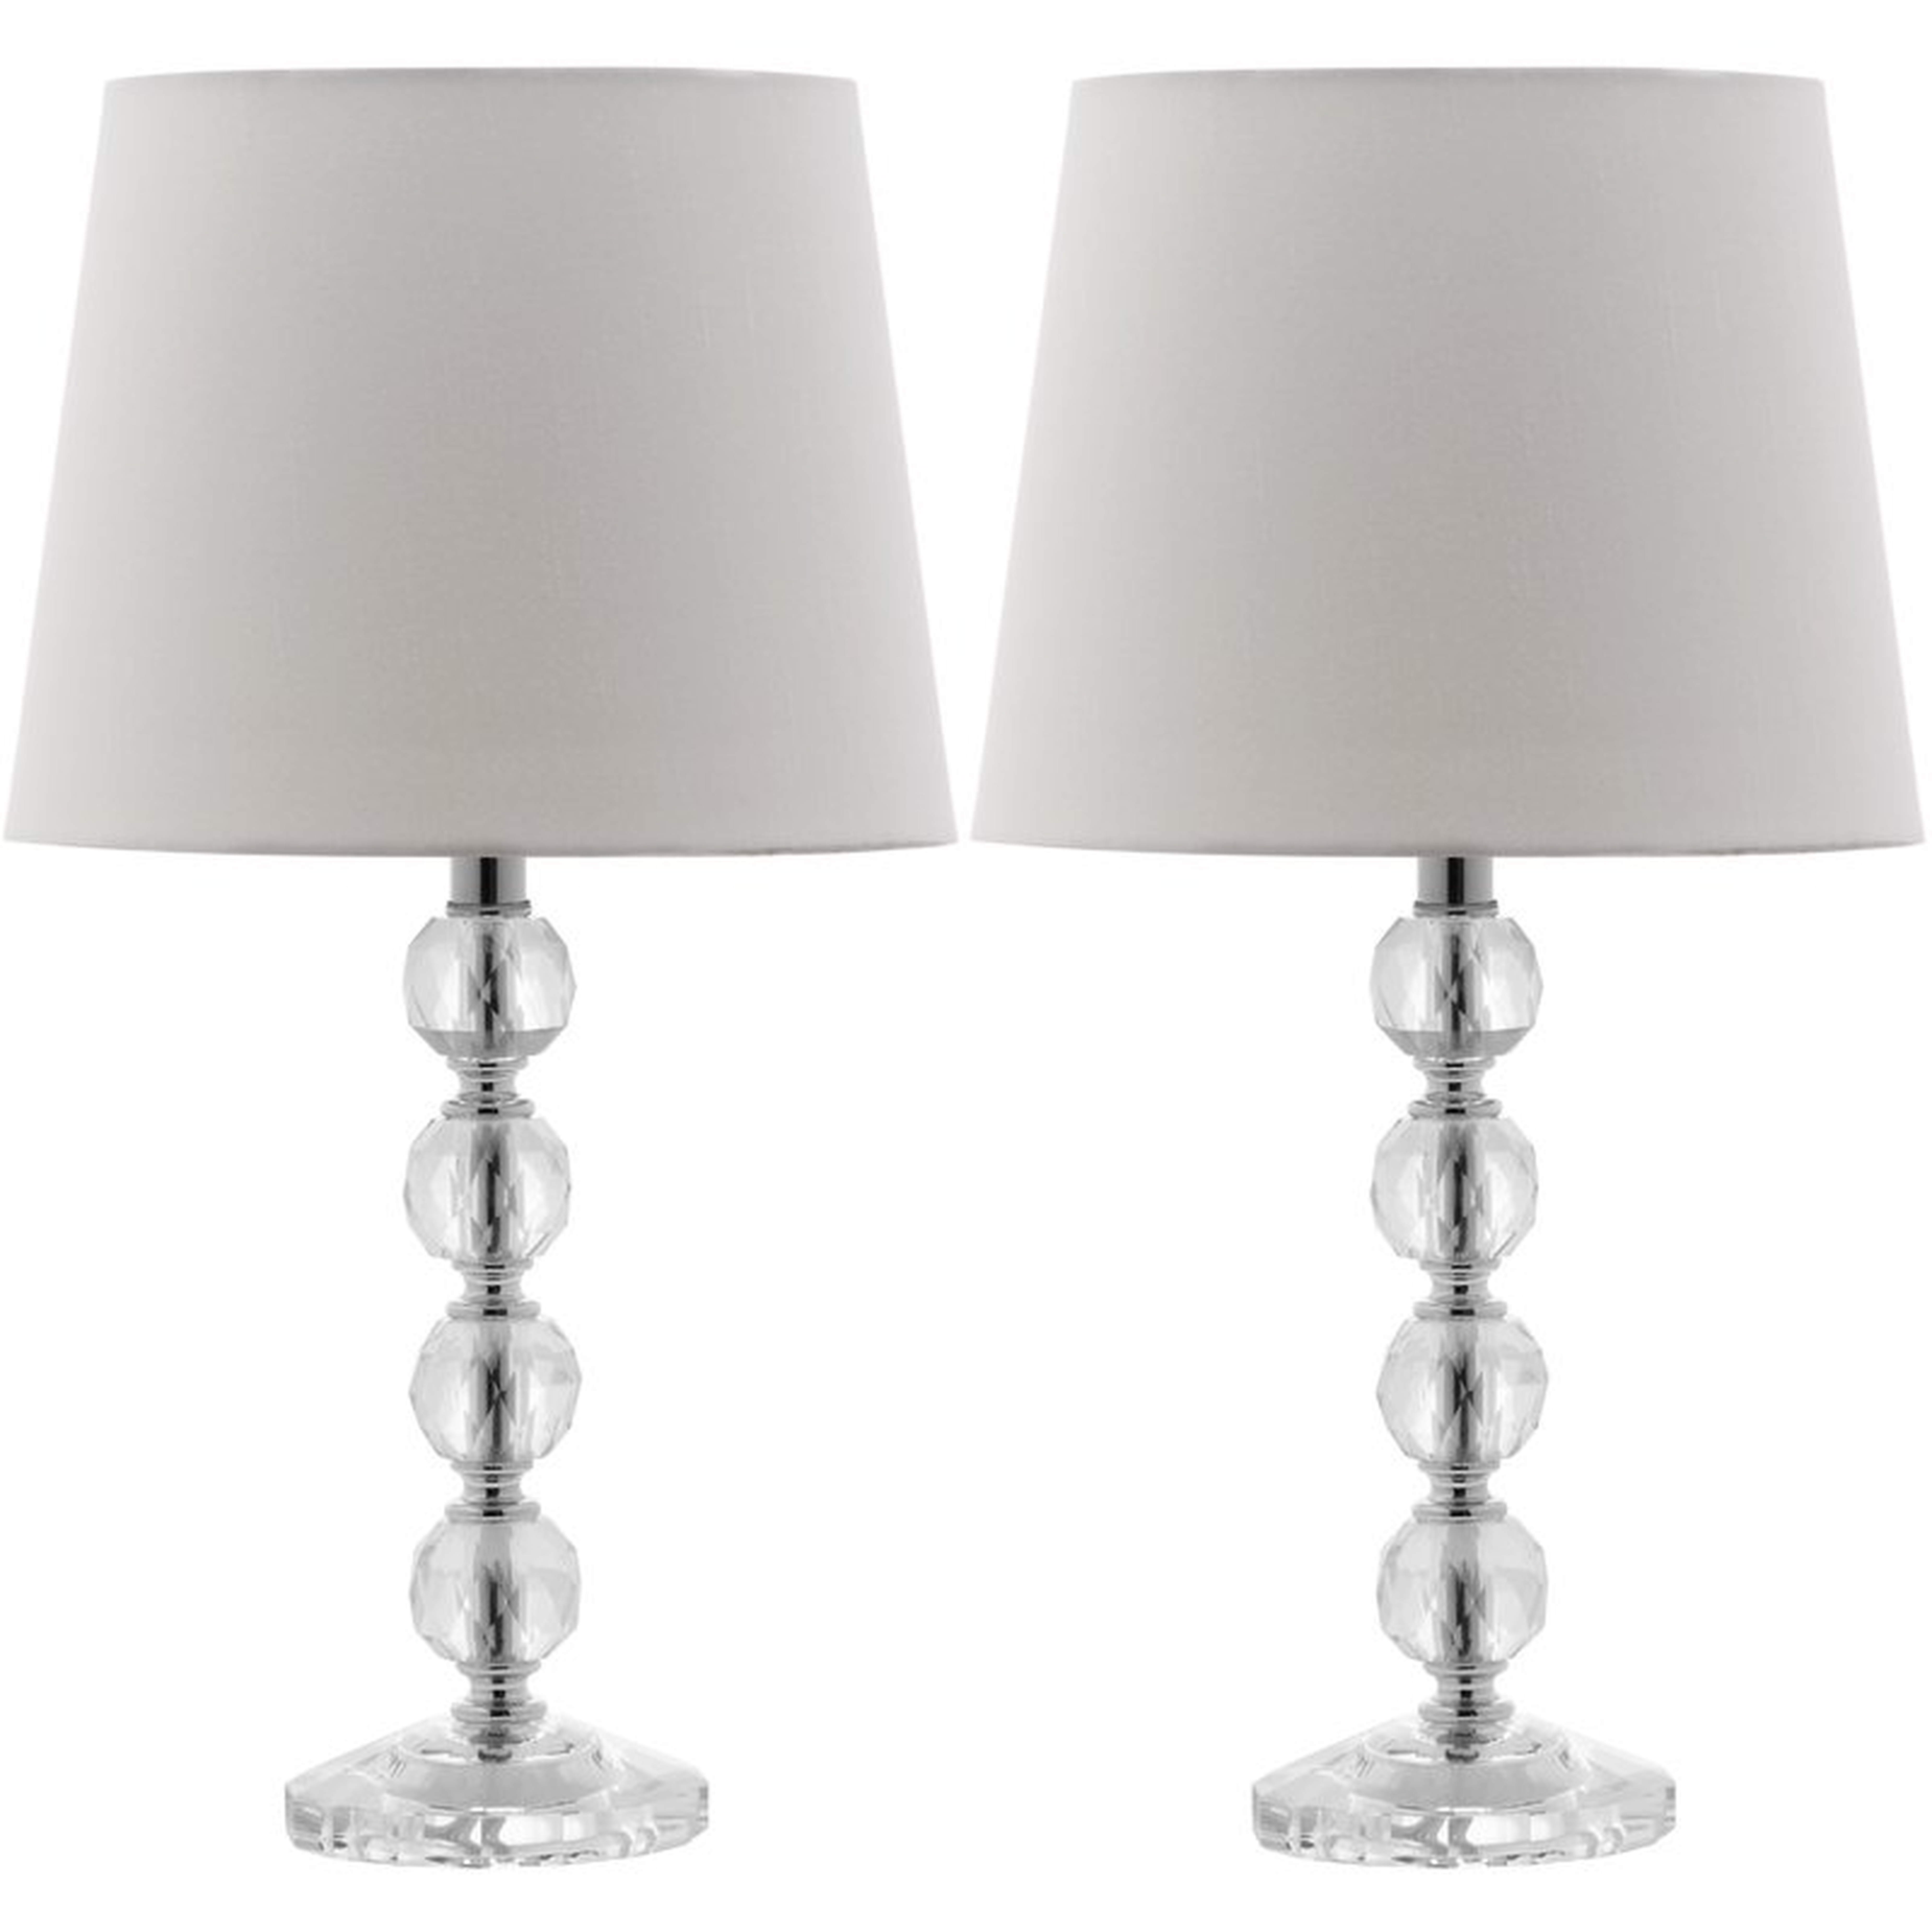 Bex Stacked Ball 16" Table Lamp set of 2 - Wayfair